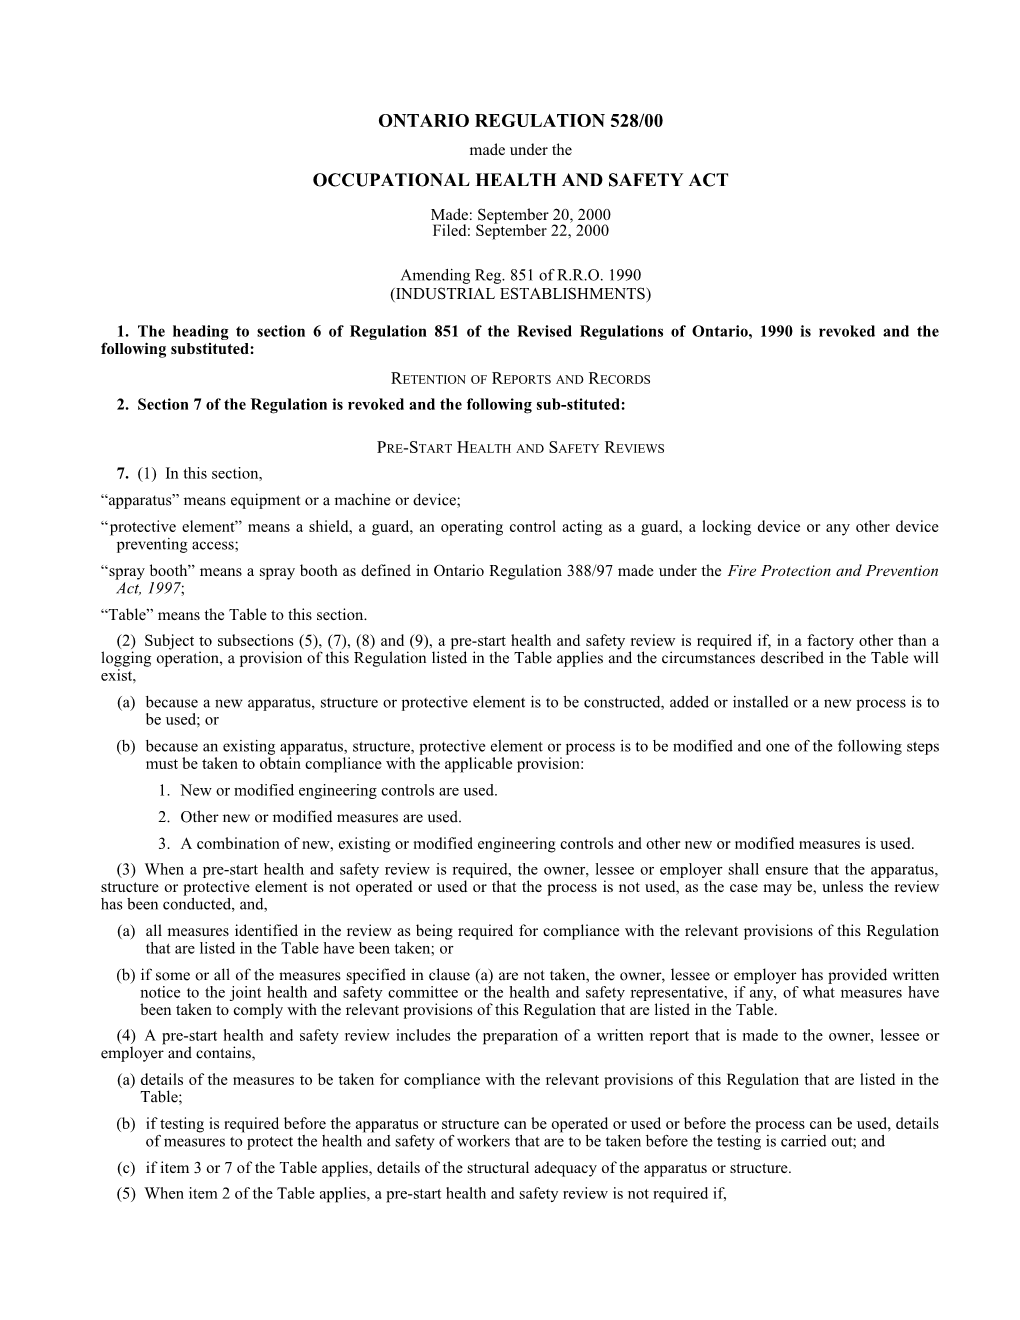 OCCUPATIONAL HEALTH and SAFETY ACT - O. Reg. 528/00